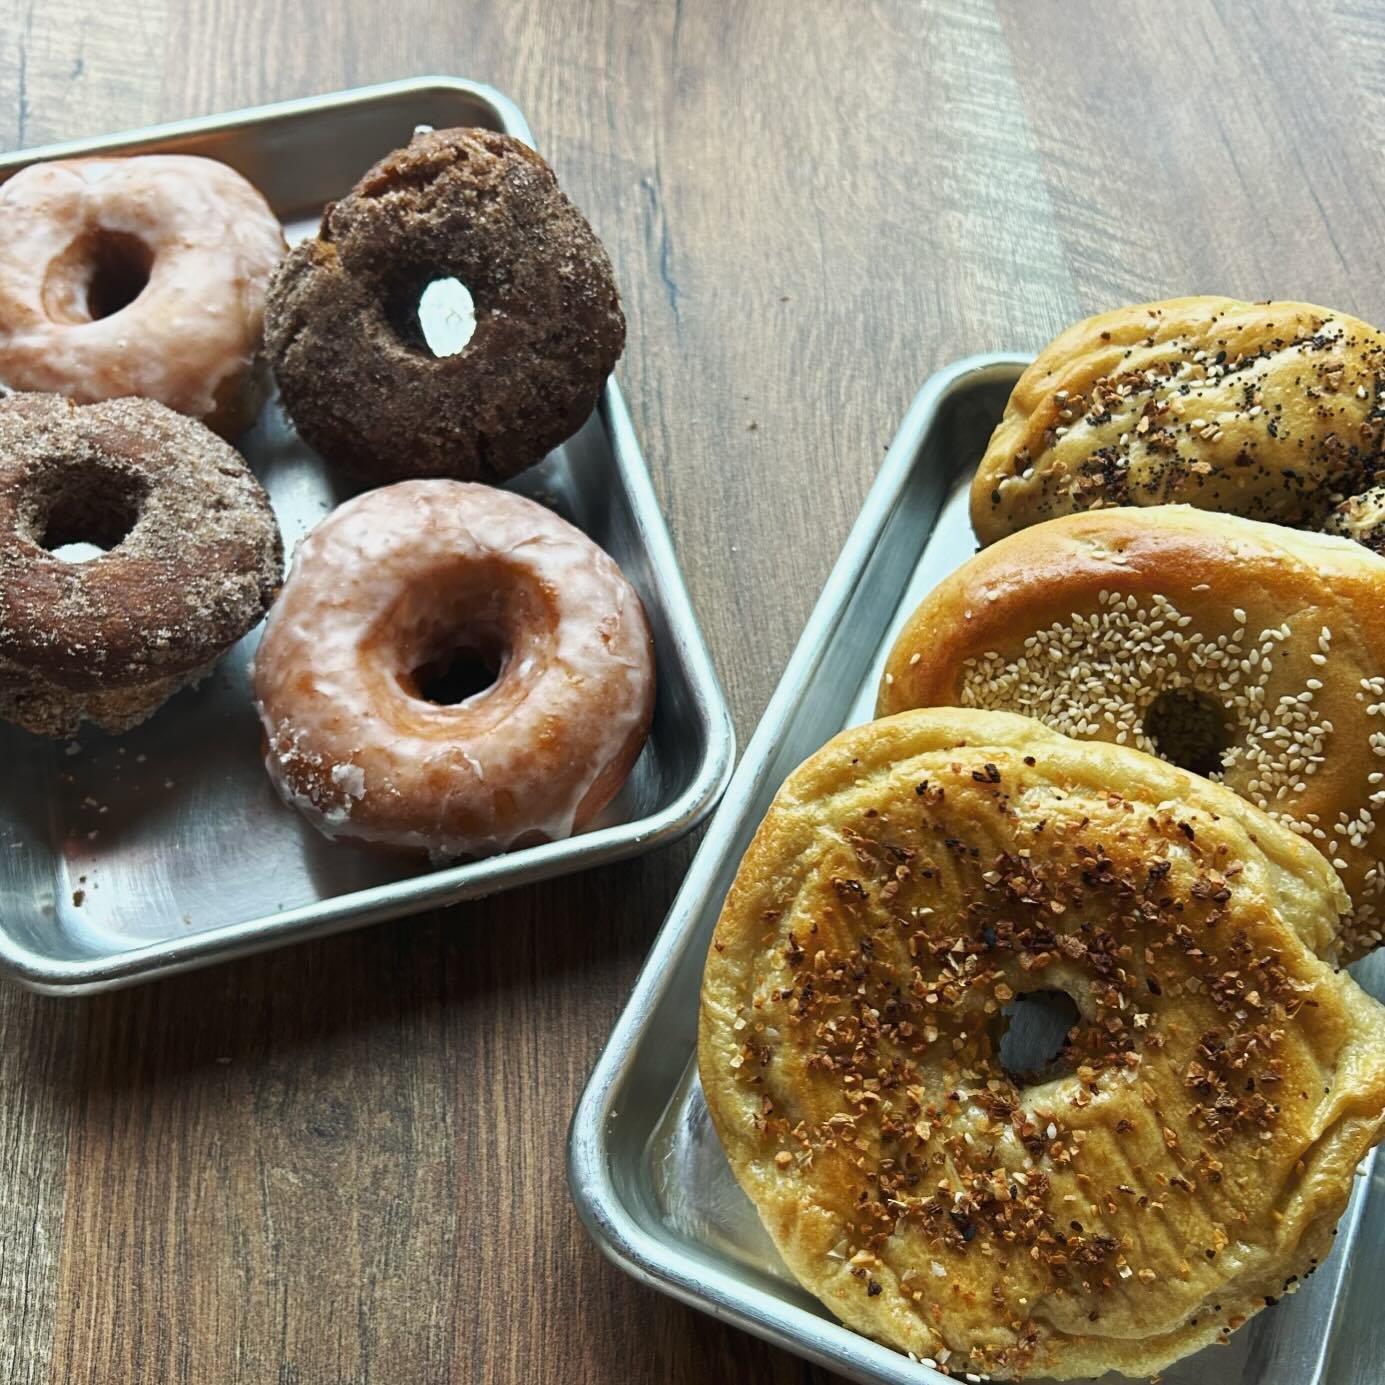 Did you know that Friday is bagel &amp; donut day at Root Down Market? Fresh from @donuts_farm apple cider &amp; maple glazed donuts PLUS! Three packs of bagels to go!